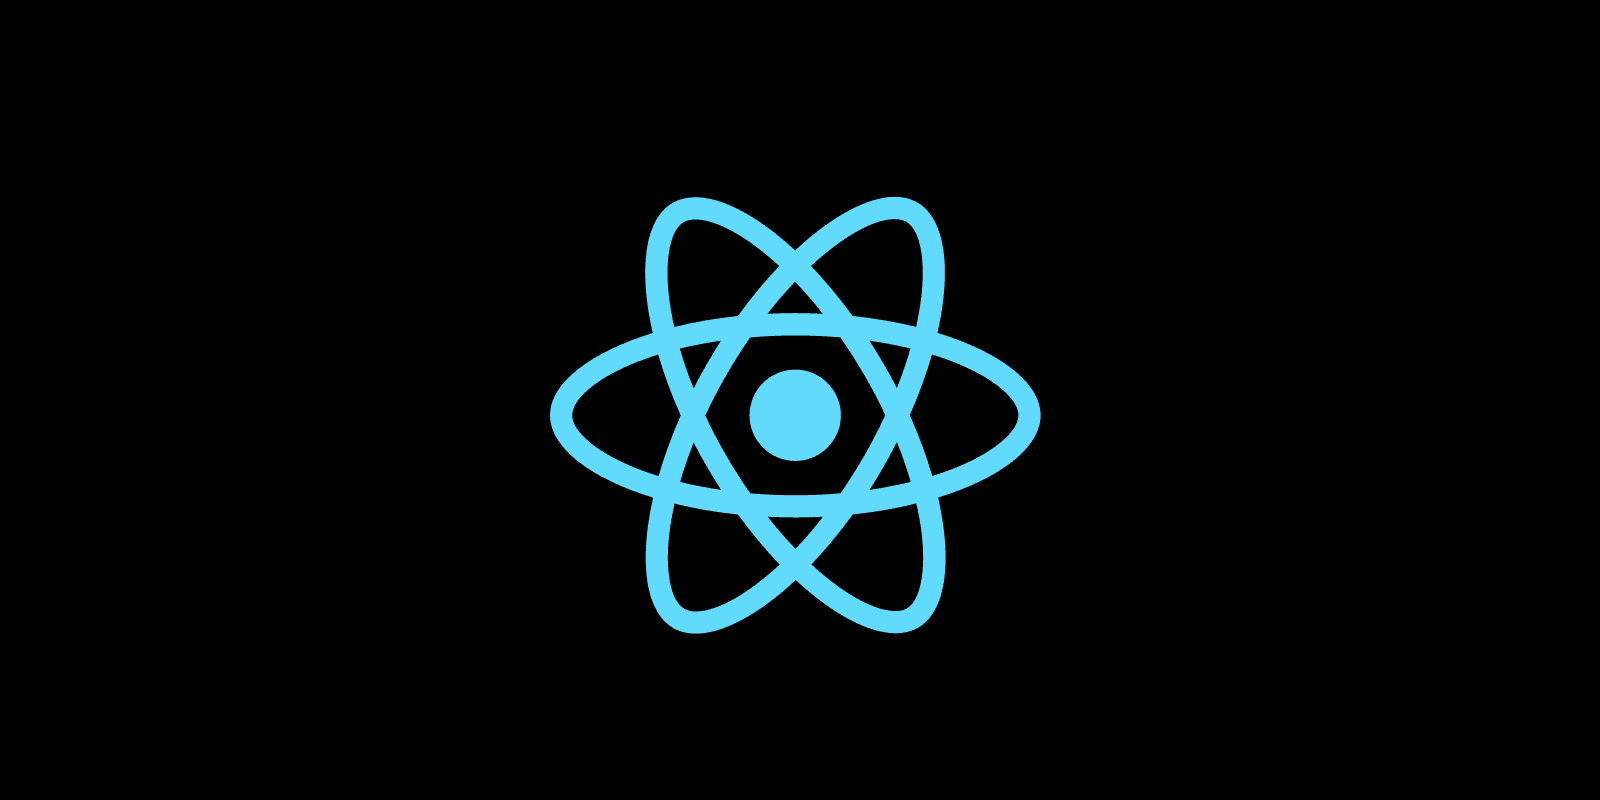 How to fetch data with React Hooks